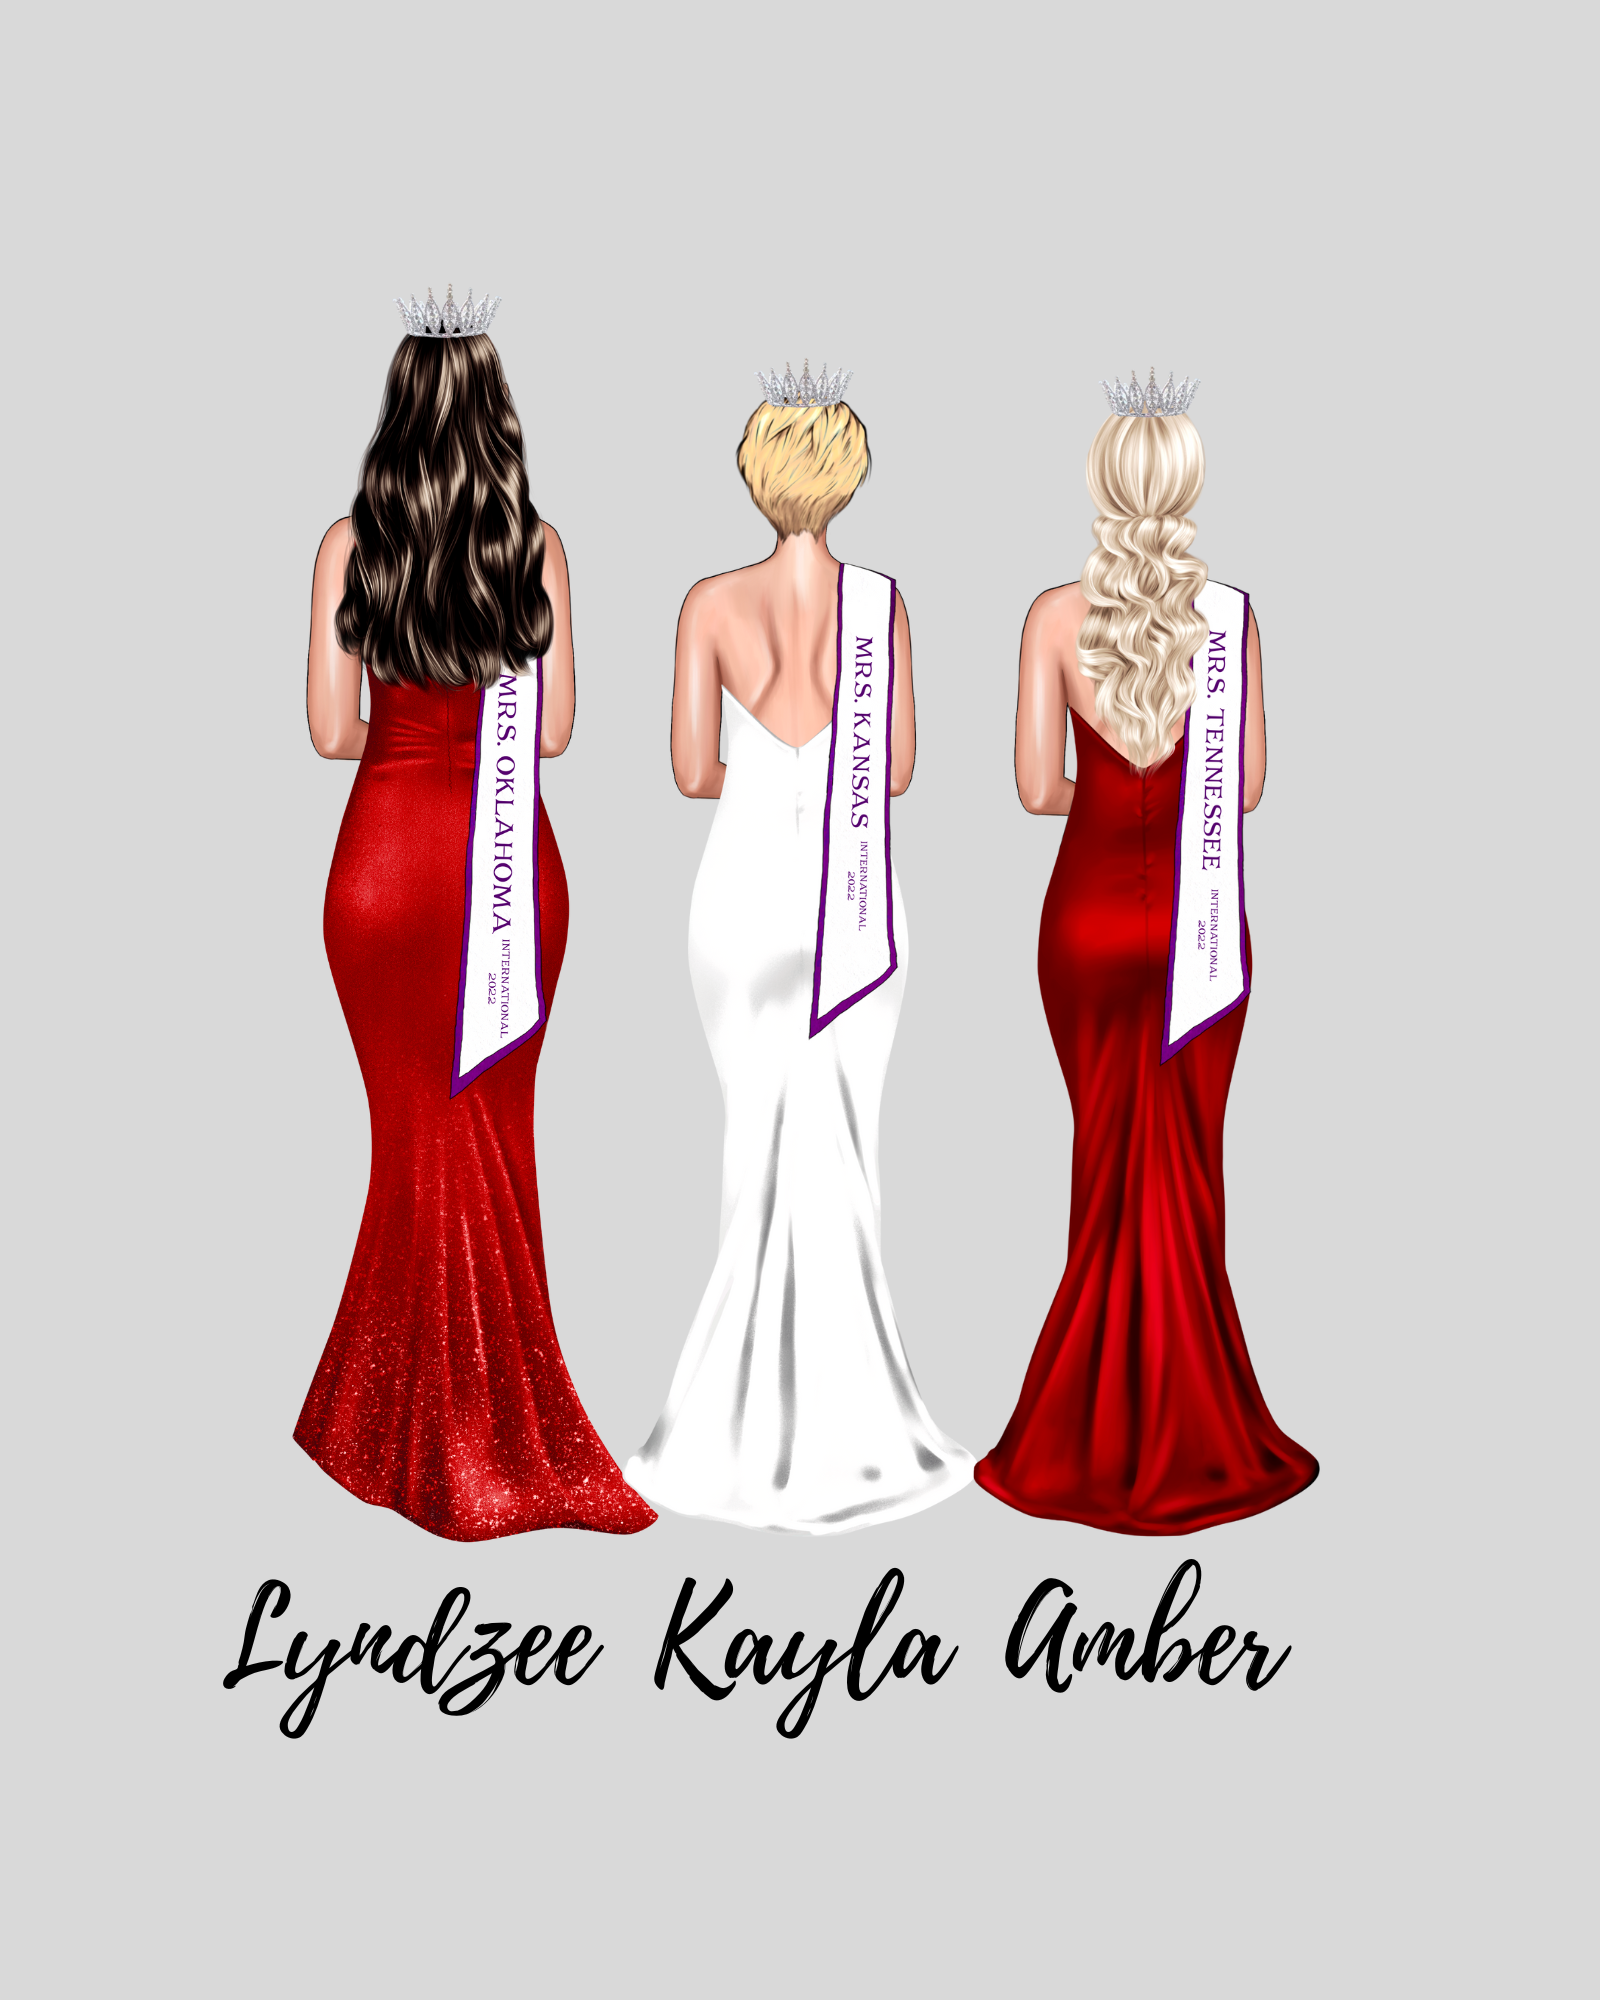 Pageant Group of 3 Digital Drawing w/ Sash